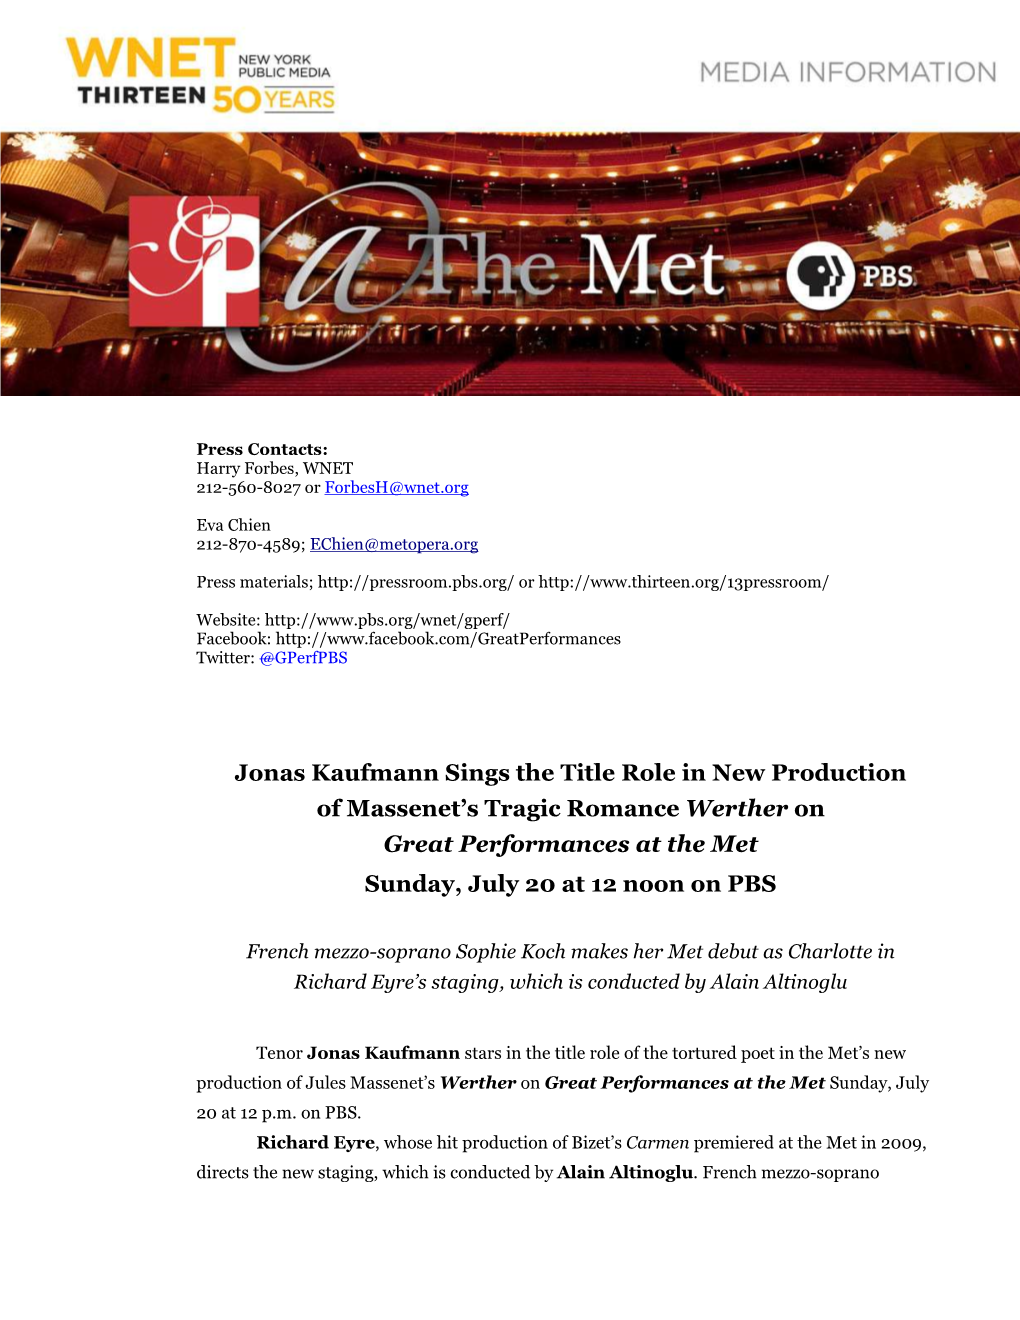 Werther on Great Performances at the Met Sunday, July 20 at 12 Noon on PBS